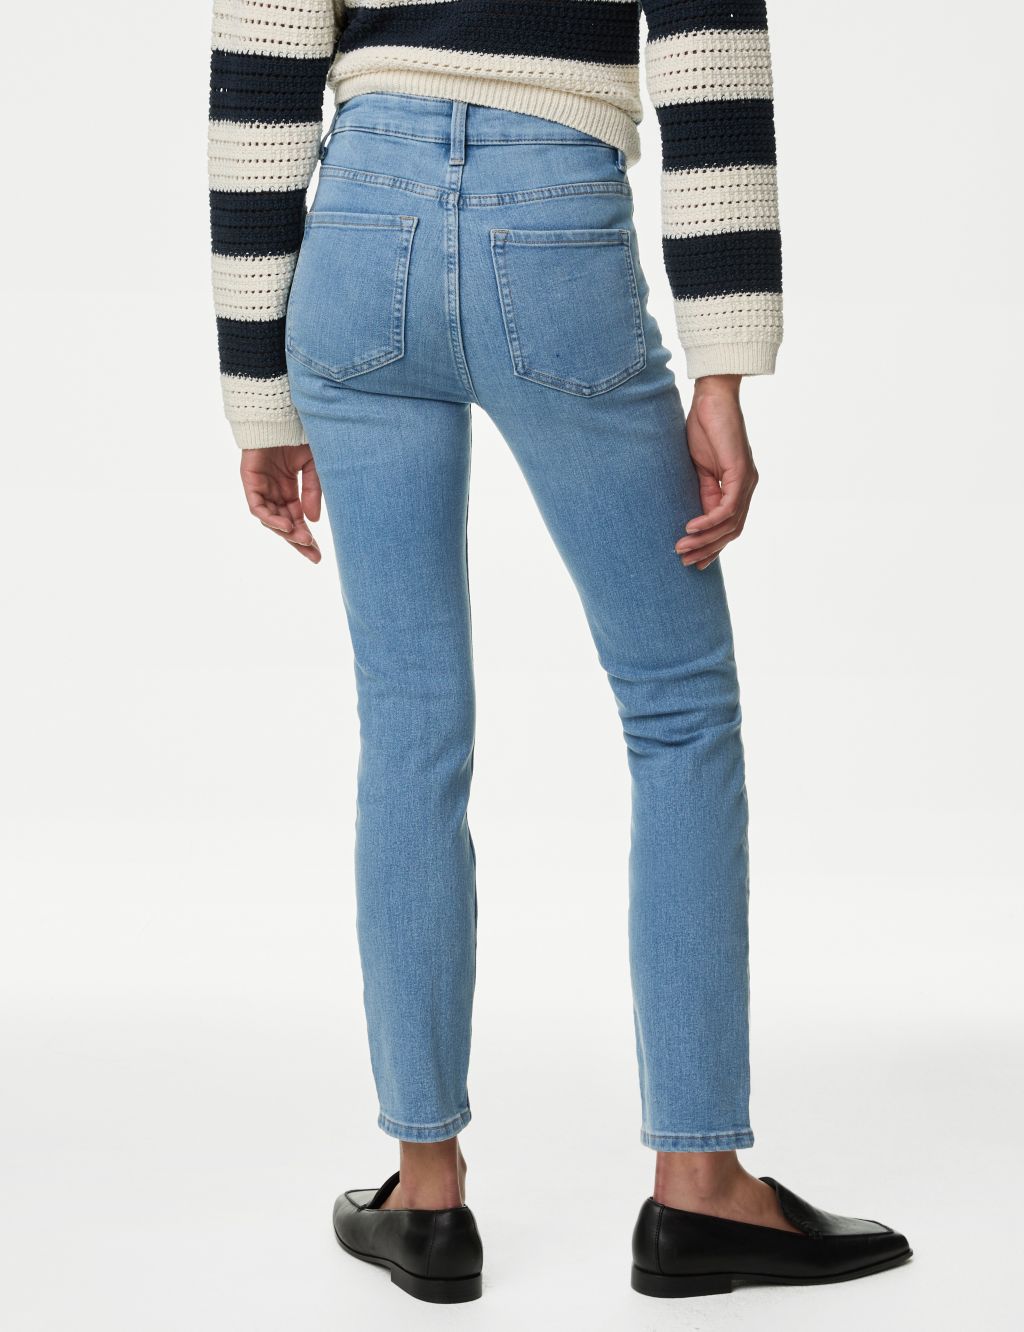 Lily Slim Fit Jeans with Stretch image 4